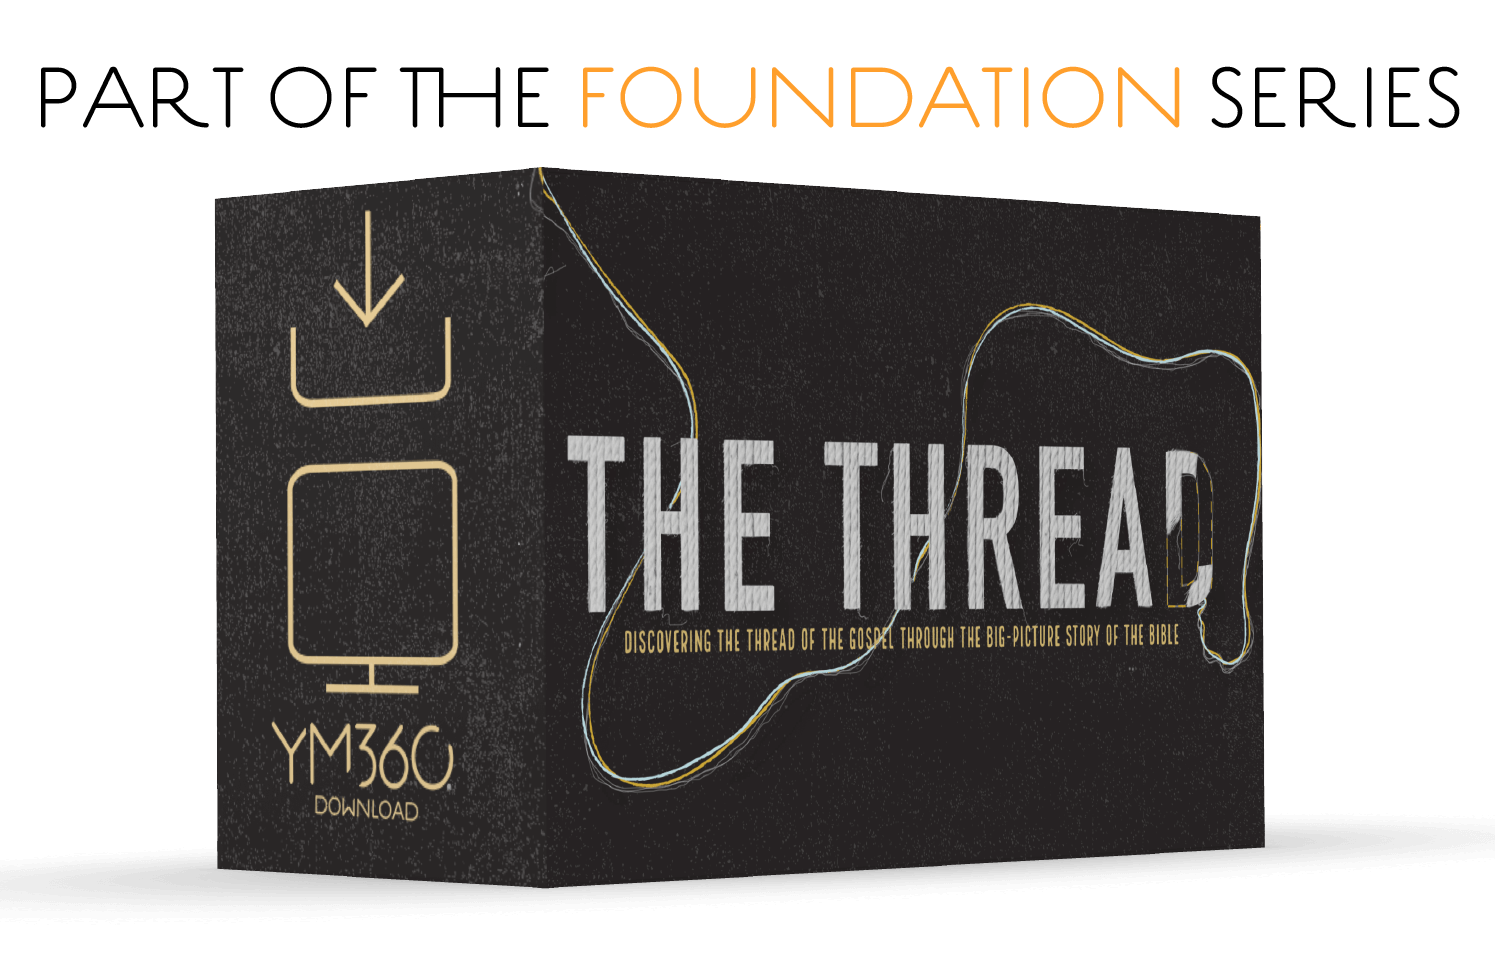 The Thread: Discovering the Thread of the Gospel Through the Big-Picture Story of the Bible